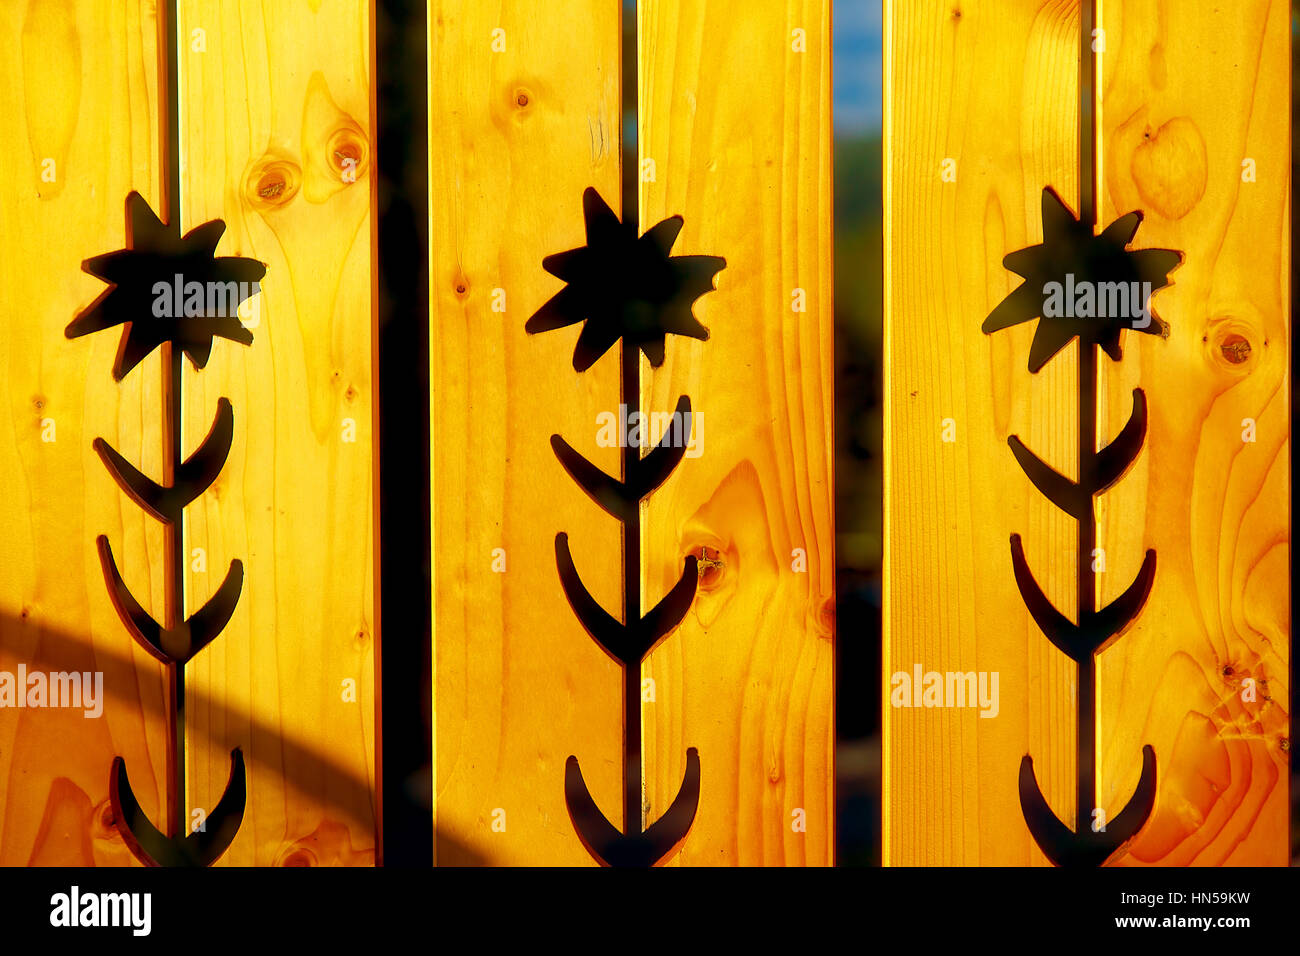 flower pattern on wood, Yellow wooden background. Stock Photo